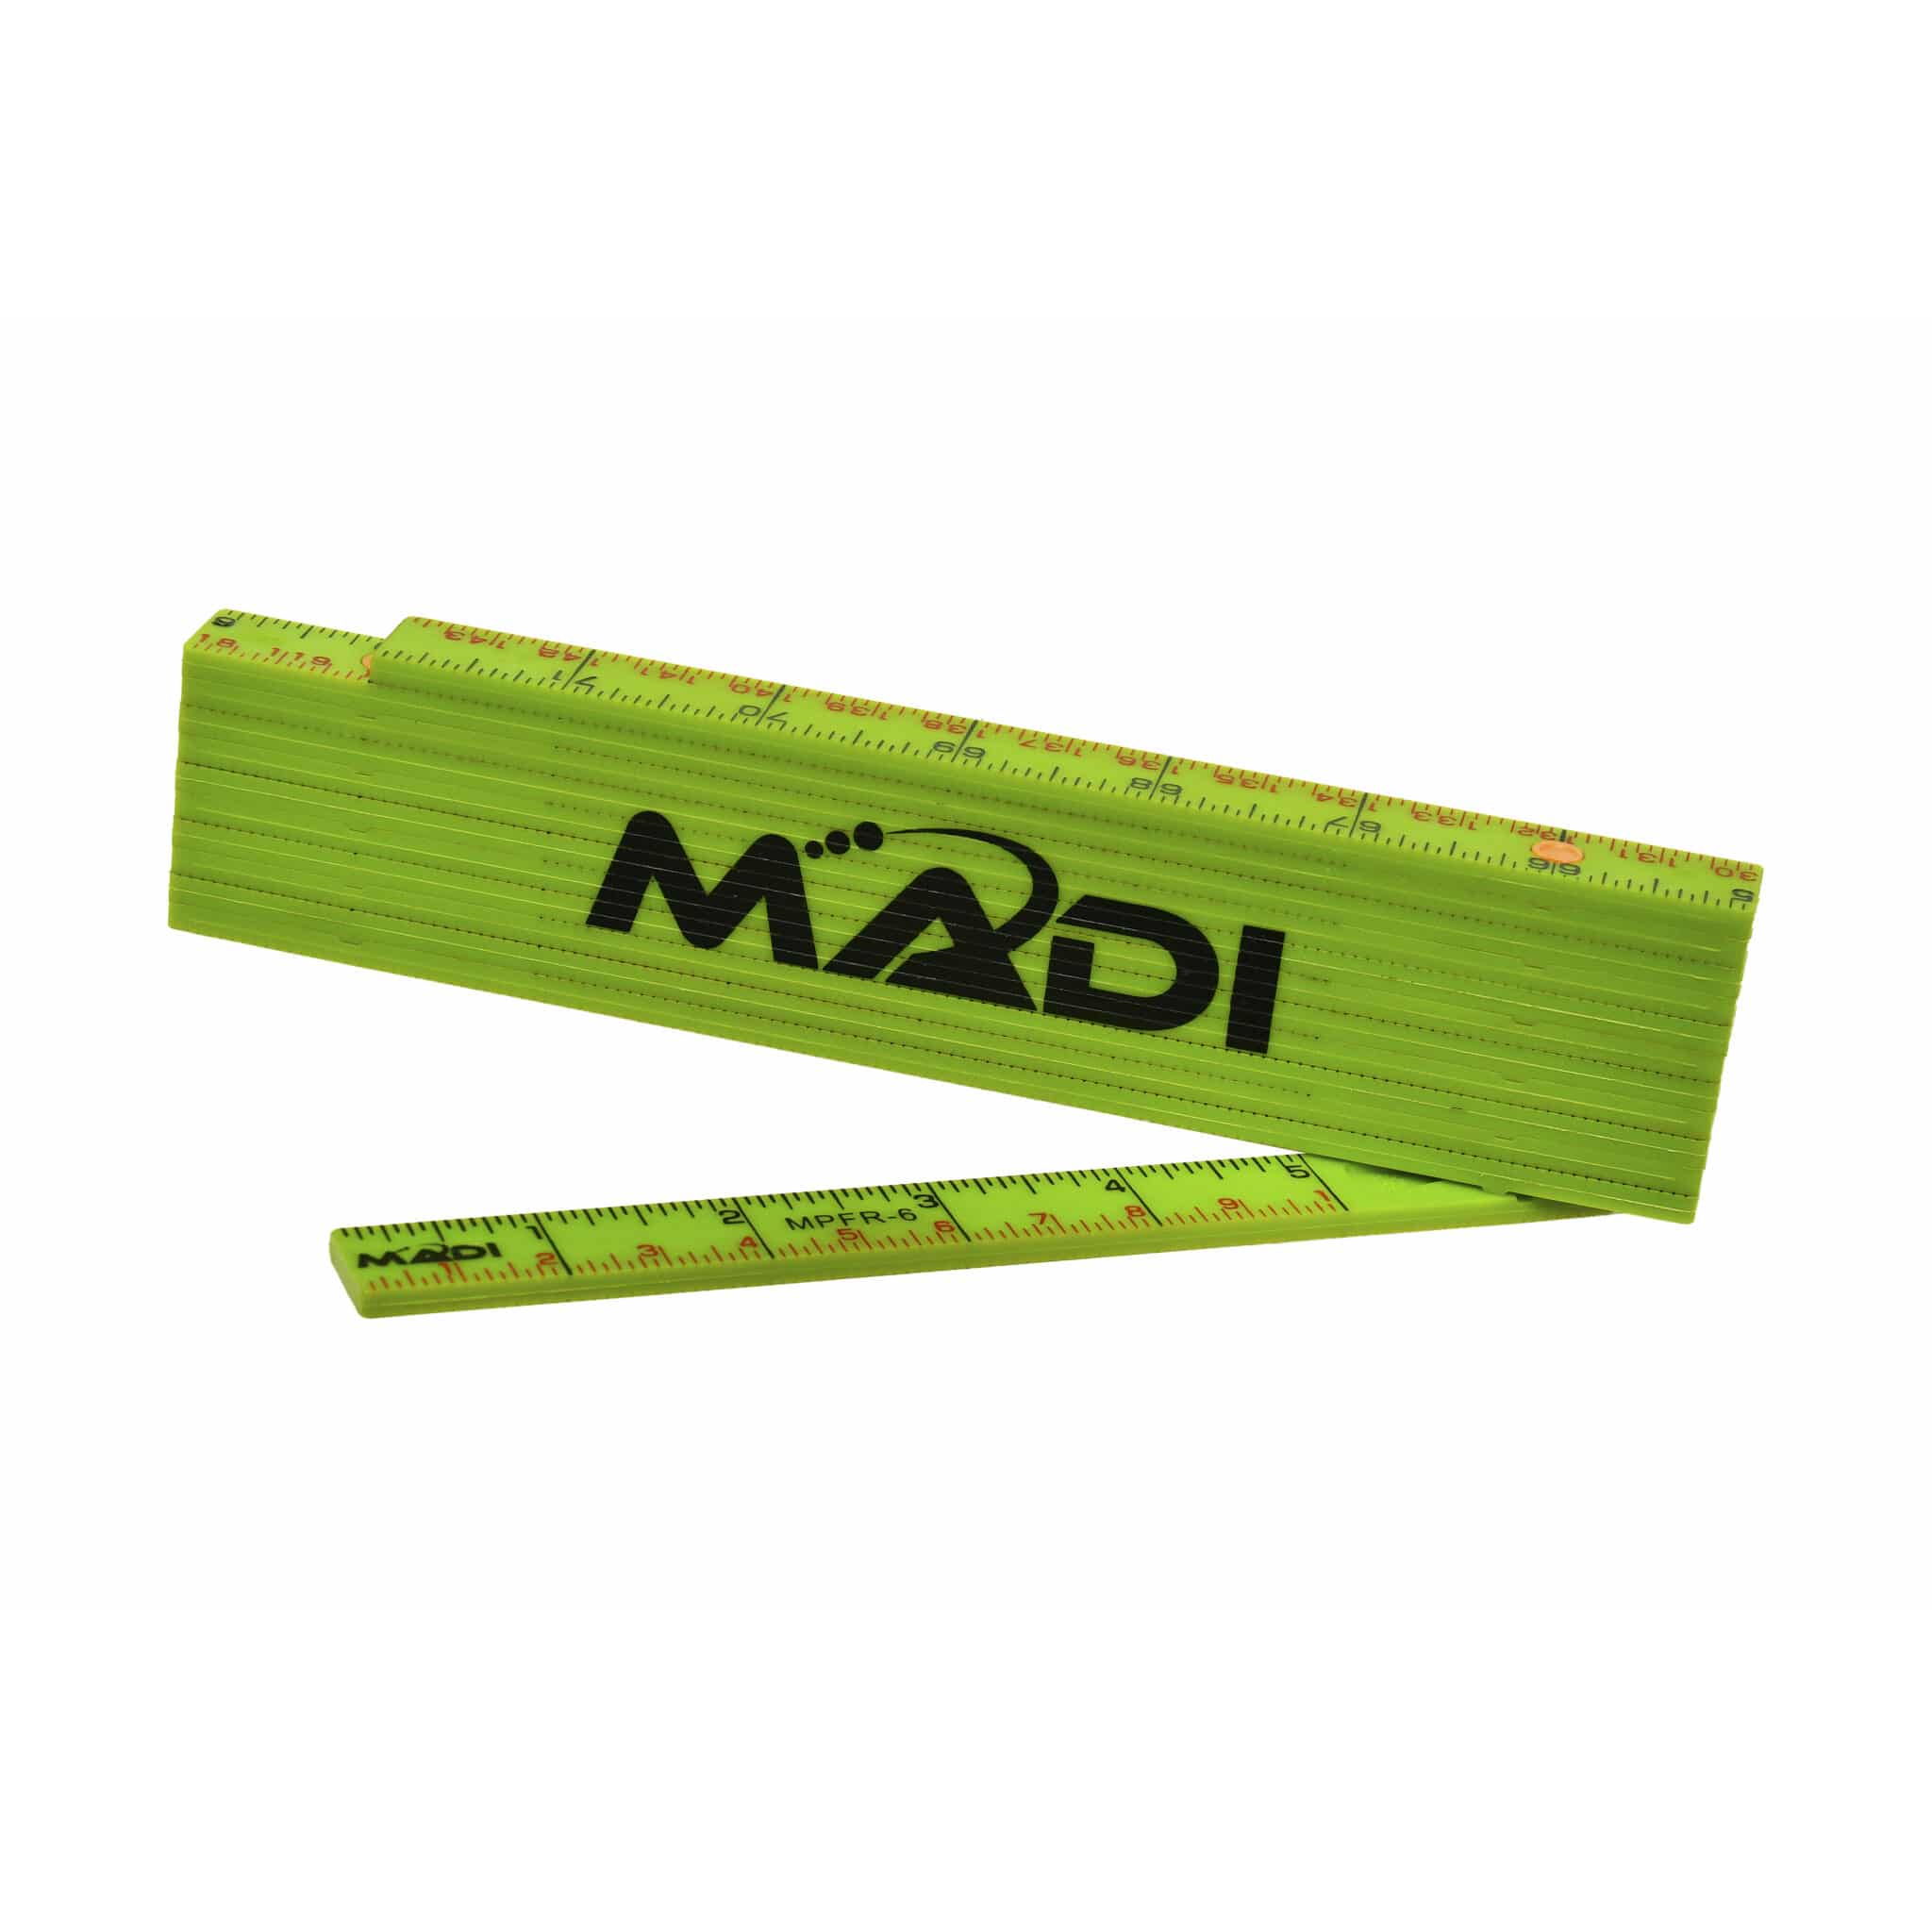 MPFR 6 MADI 6 foot Fiberglass Folding Ruler with Center Finding Scale logo scaled 1